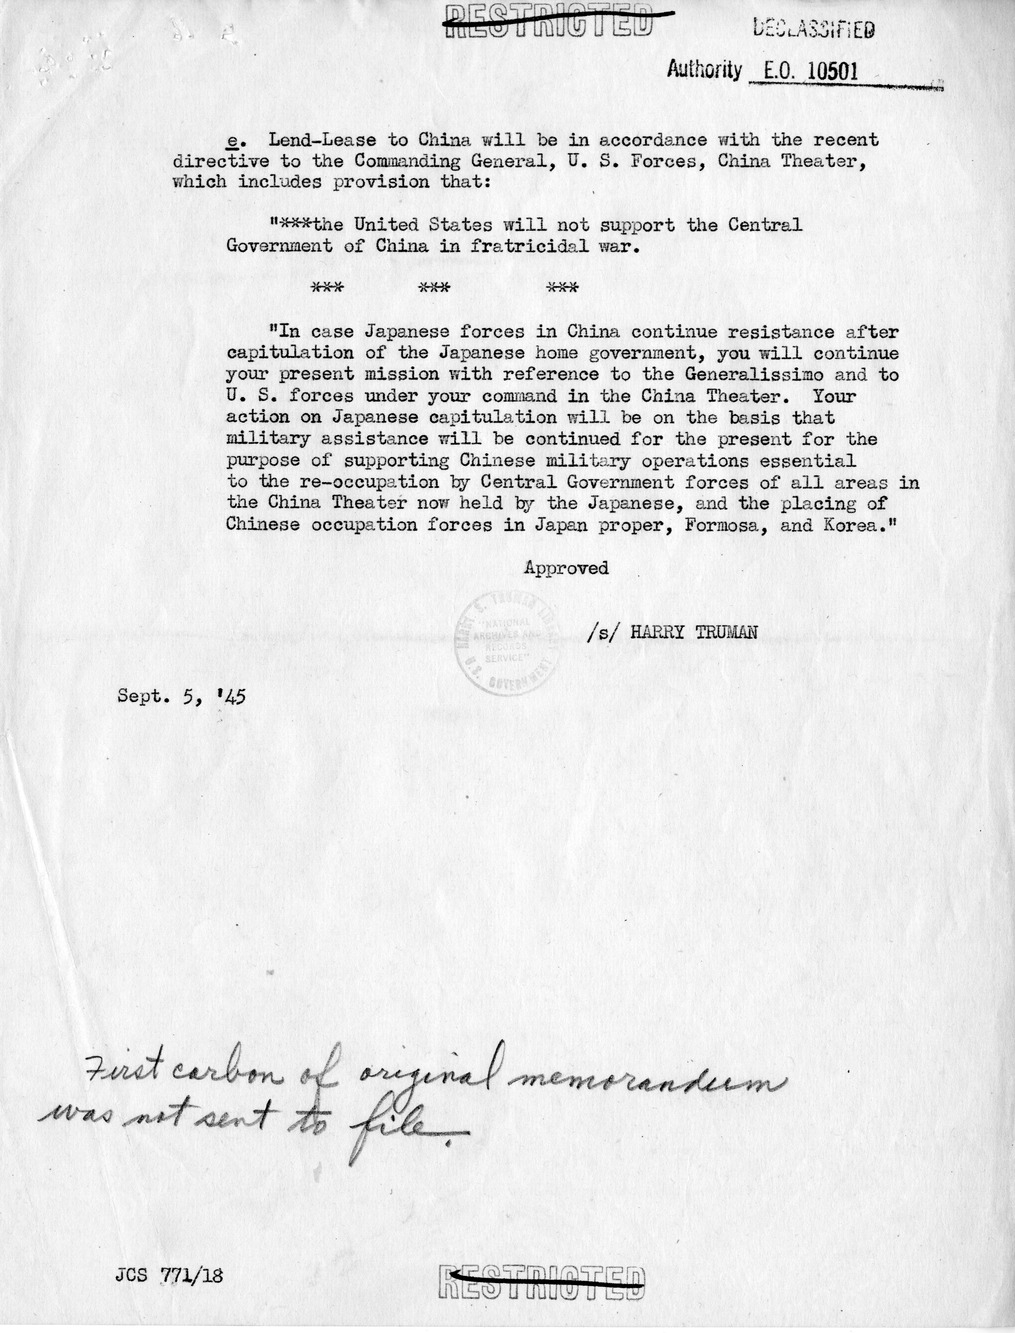 Memorandum from Secretary of State James Byrnes to President Harry S. Truman, with Attachments